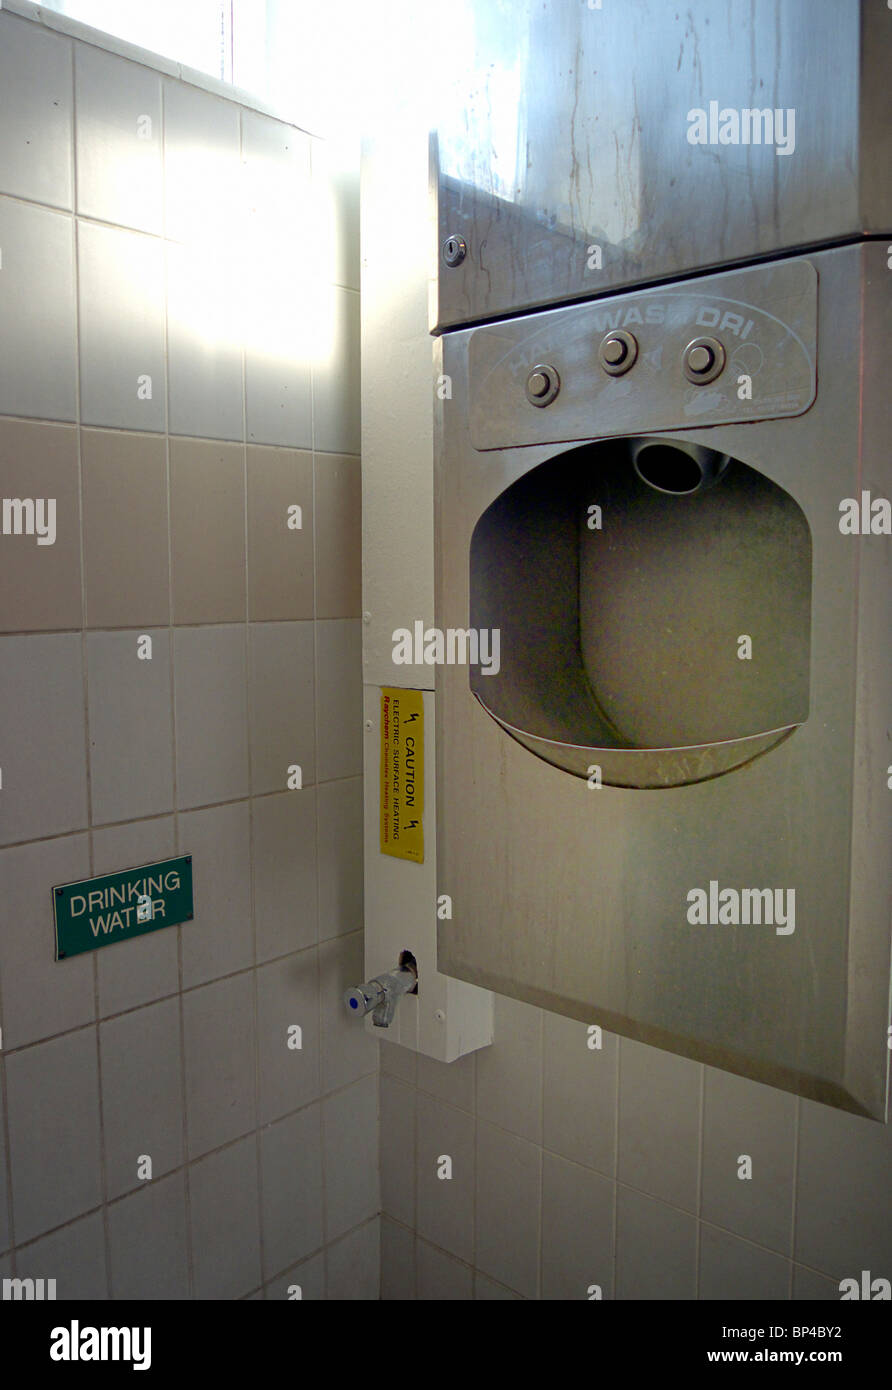 automated-hand-washer-dryer-in-public-to